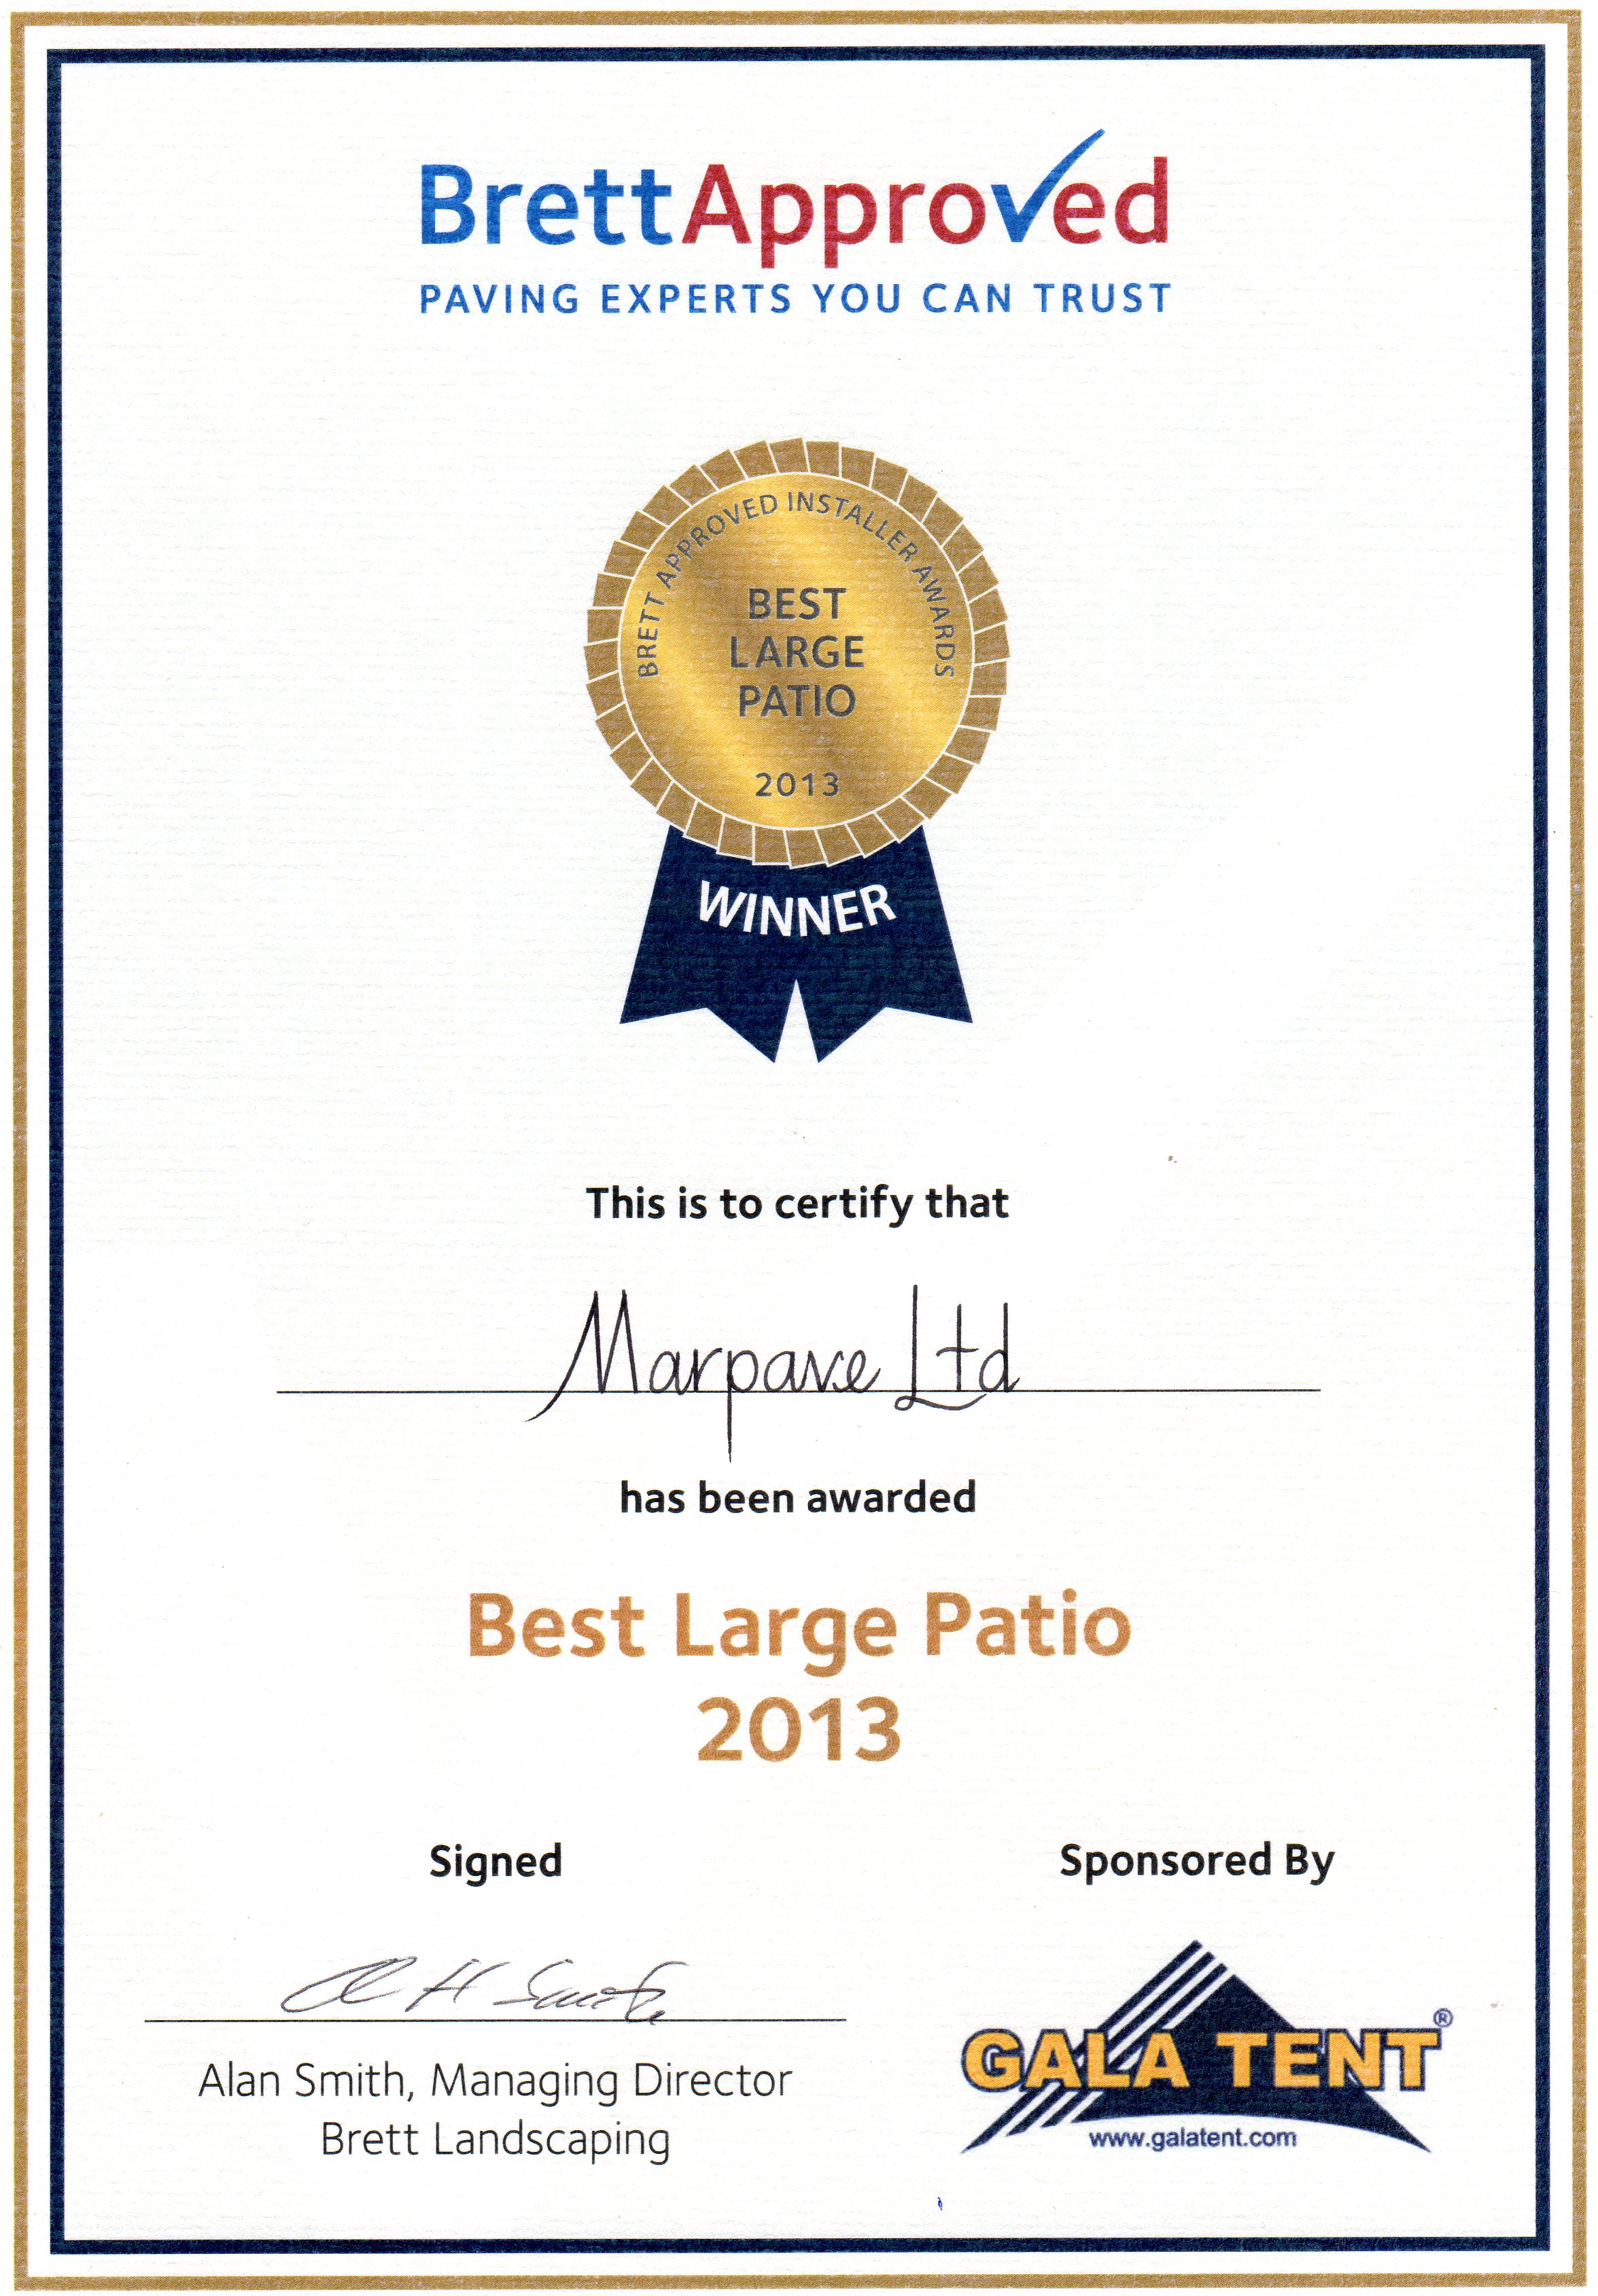 Best Large Patio category